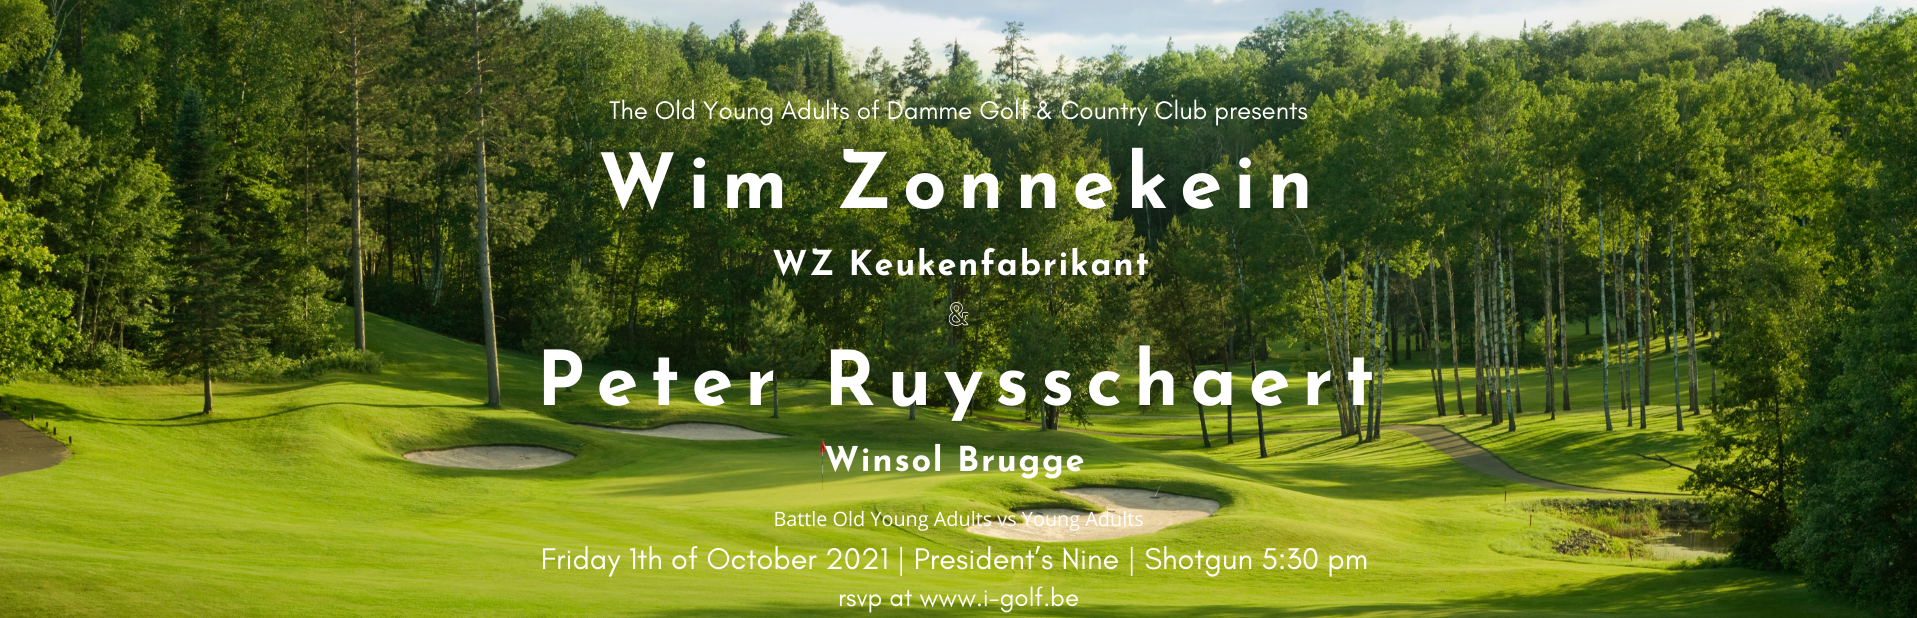 2021.10.01 Last ‘Battle’ Old Young Adults vs Young Adults – Peter Ruysschaert (Winsol Brugge) & Wim Zonnekein (WZ Keukenfabrikant)